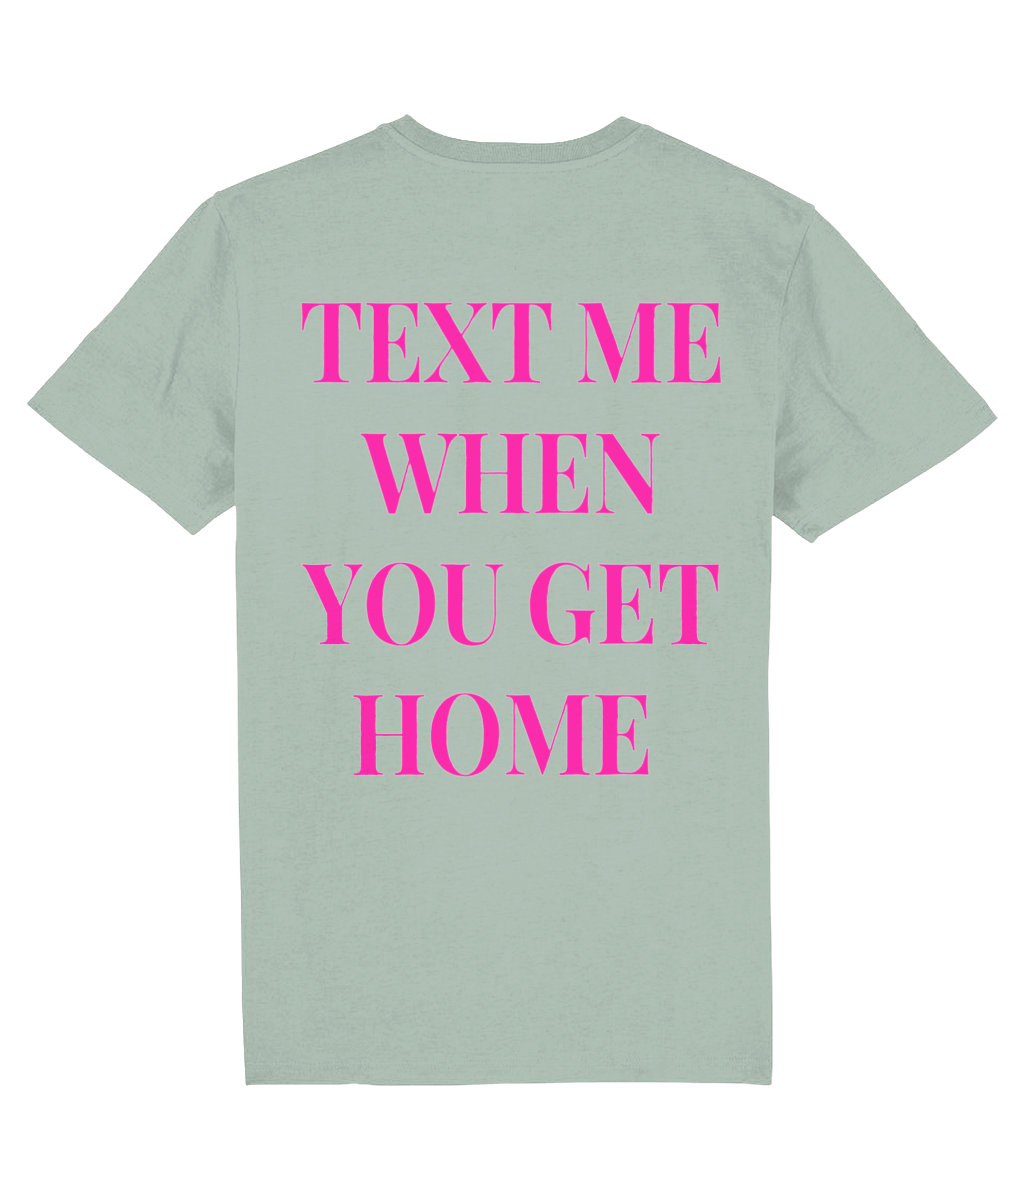 TEXT ME WHEN YOU GET HOME SHIRT